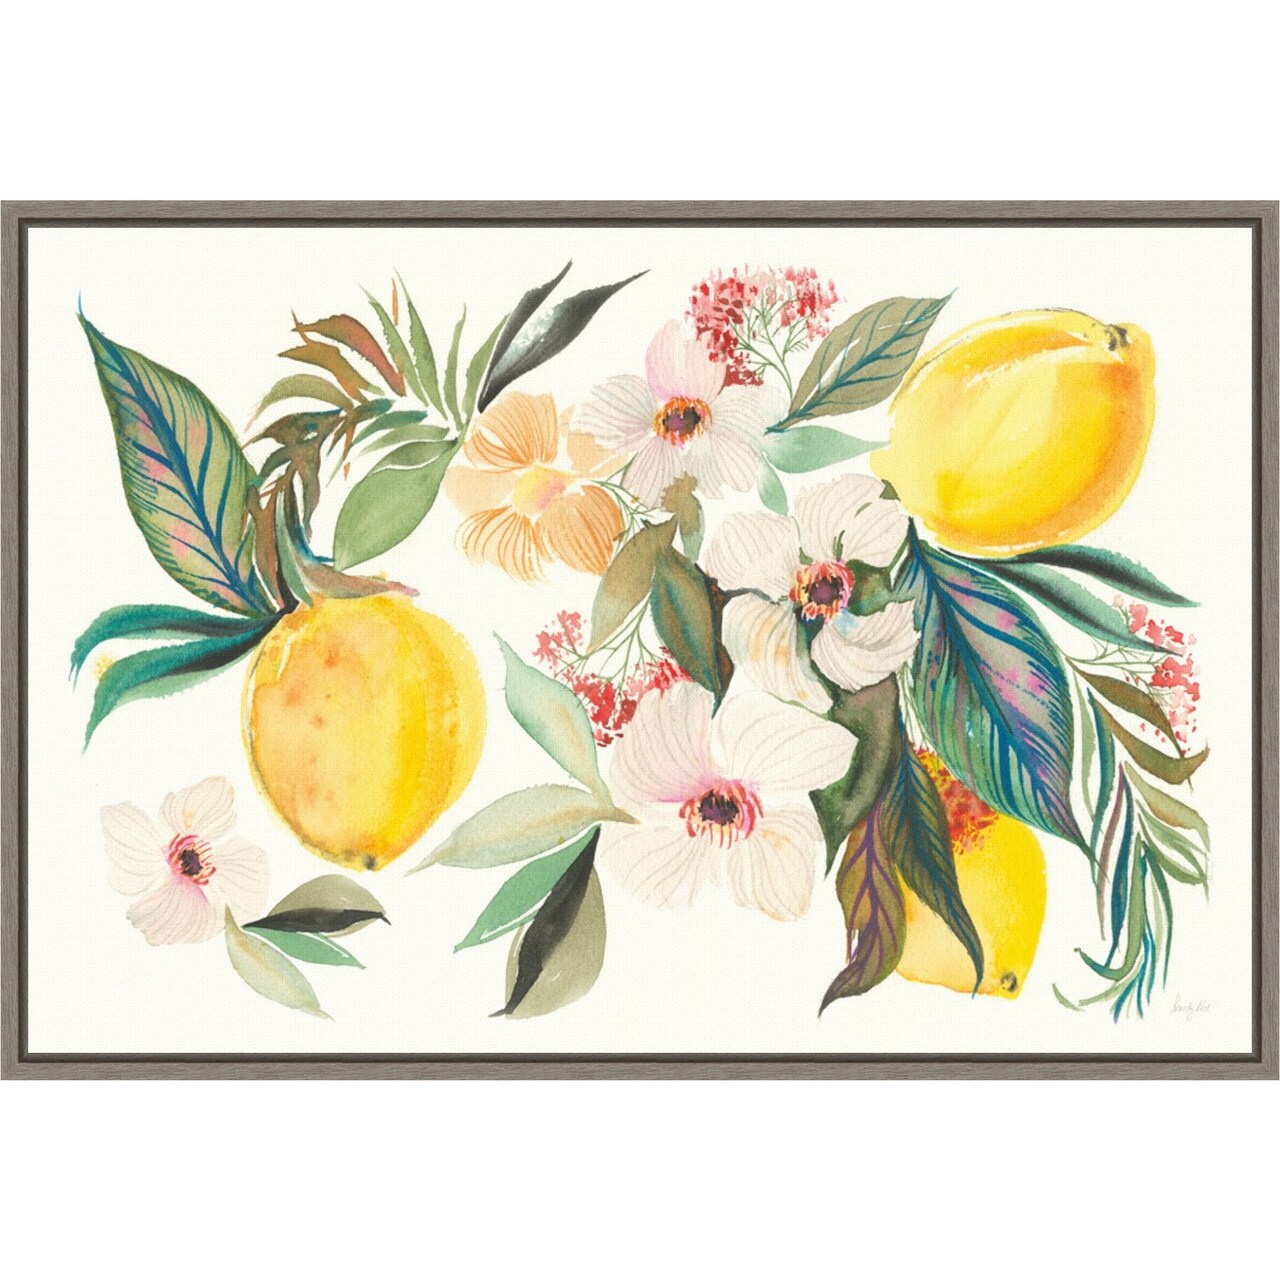 Citrus Summer I v2 by Kristy Rice 23-in. W x 16-in. H. Canvas Wall